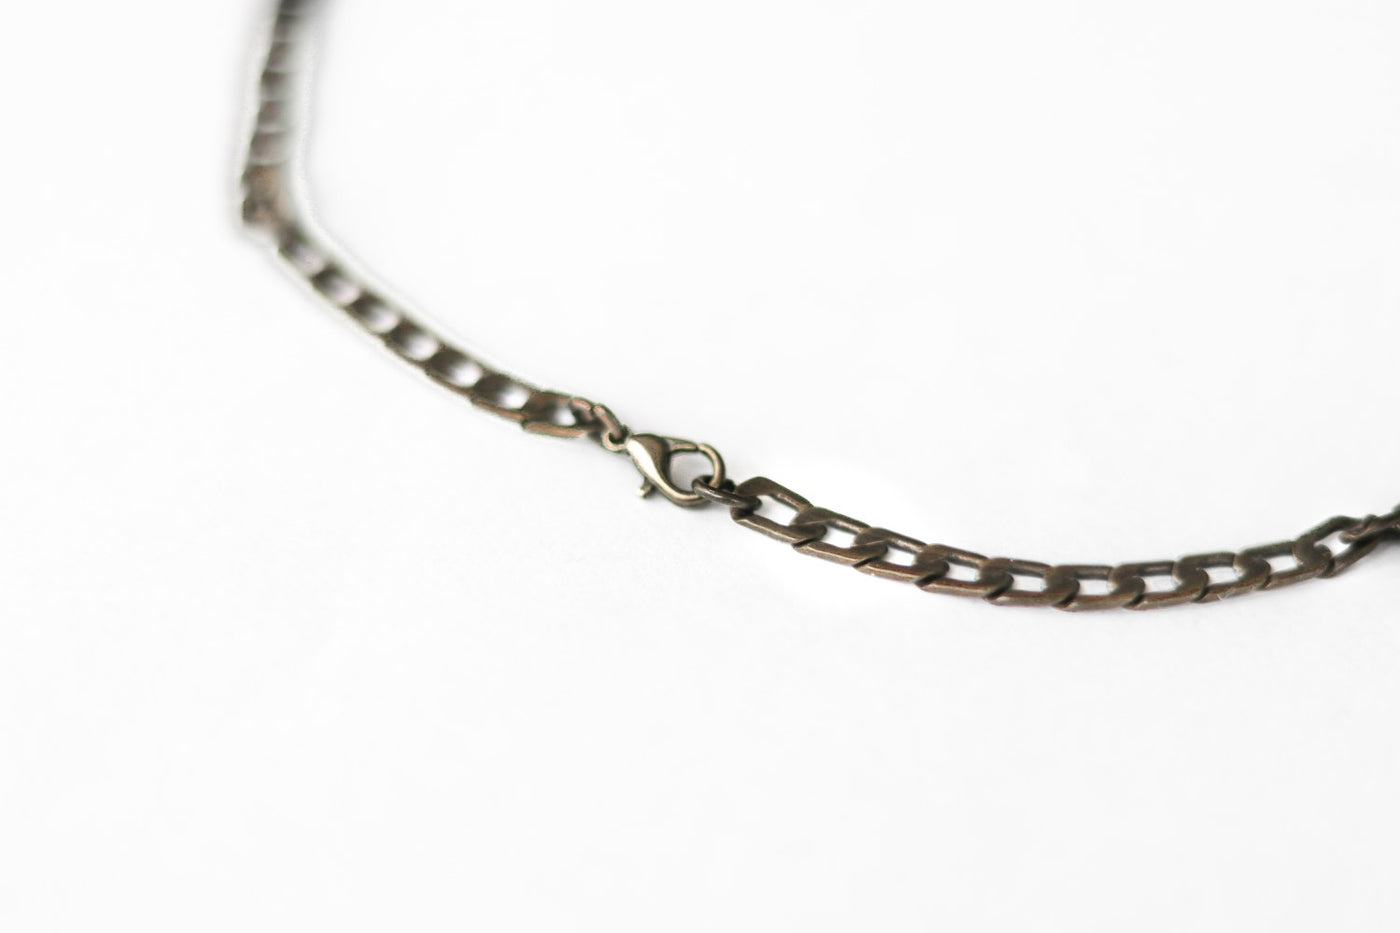  Silver links chain necklace for men, men's necklace, cable chain,  gift for him, mens jewelry, silver, for man, fathers day present, boy :  Handmade Products